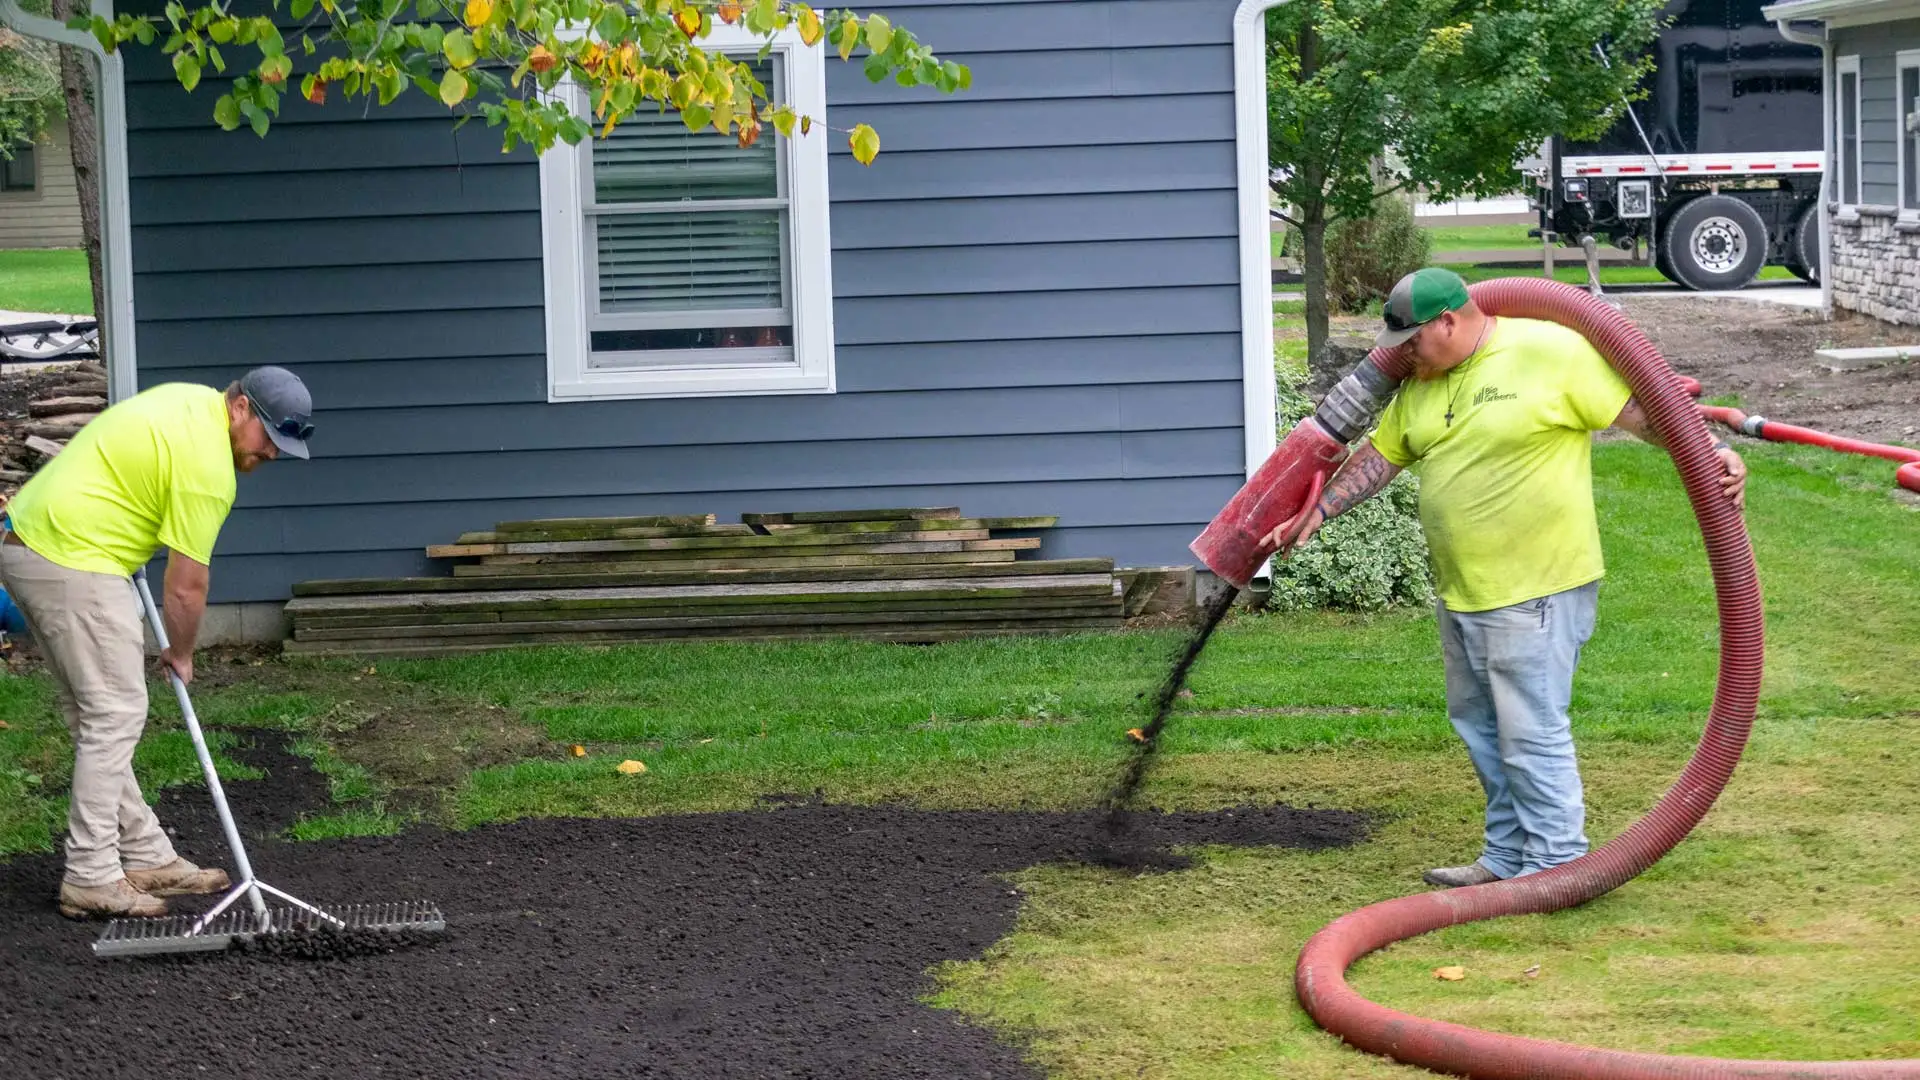 Two workers from Big Greens terraseeding a lawn in Ohio.